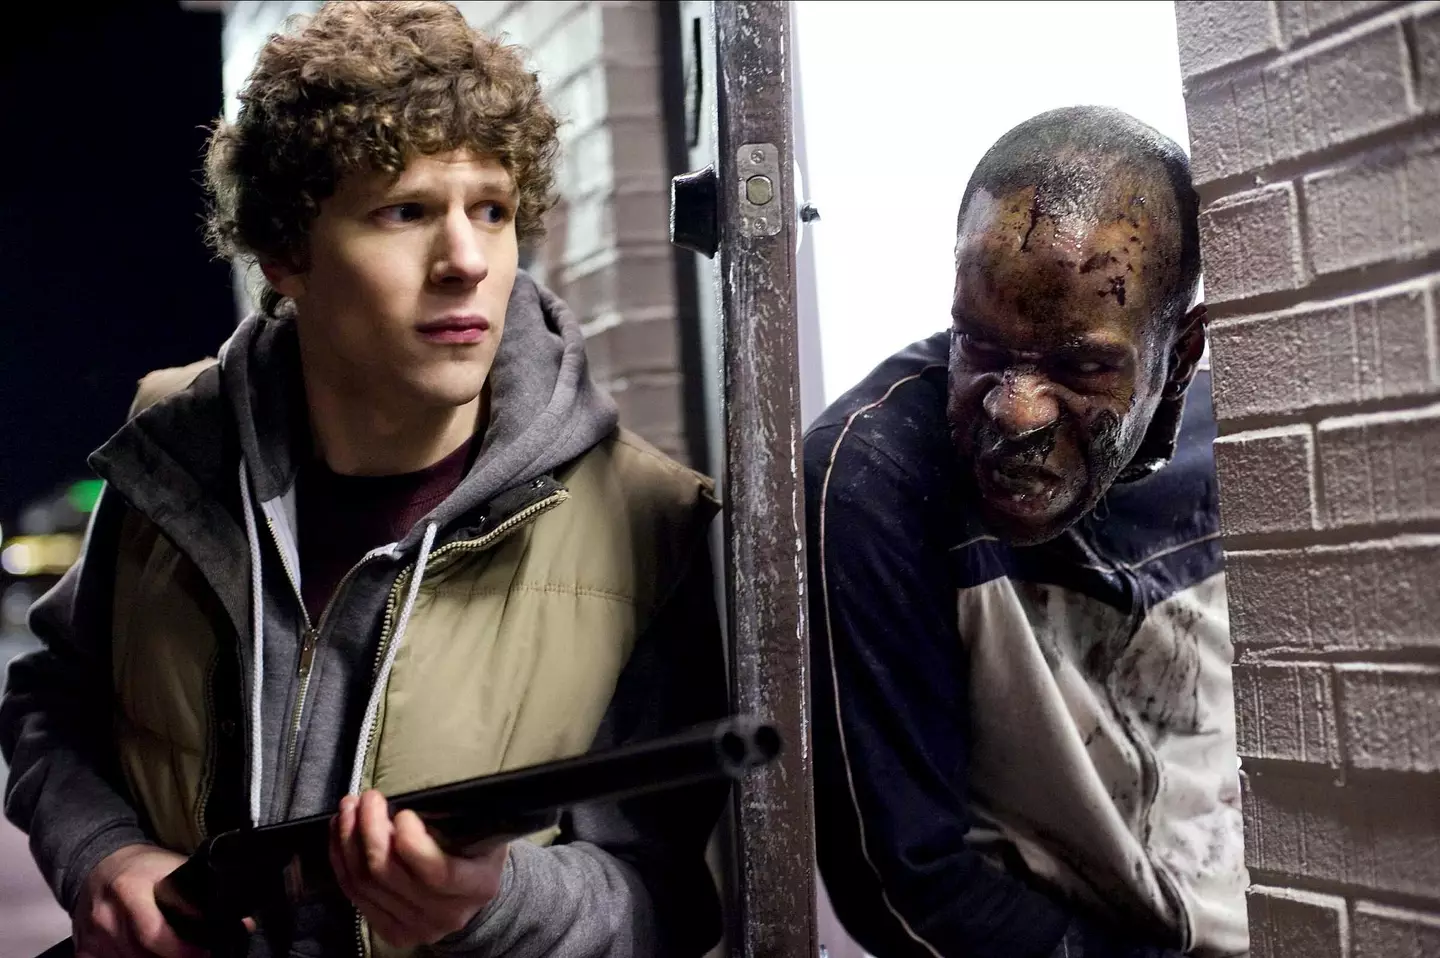 Jesse Eisenberg made his name with movies like Zombieland and The Social Network.